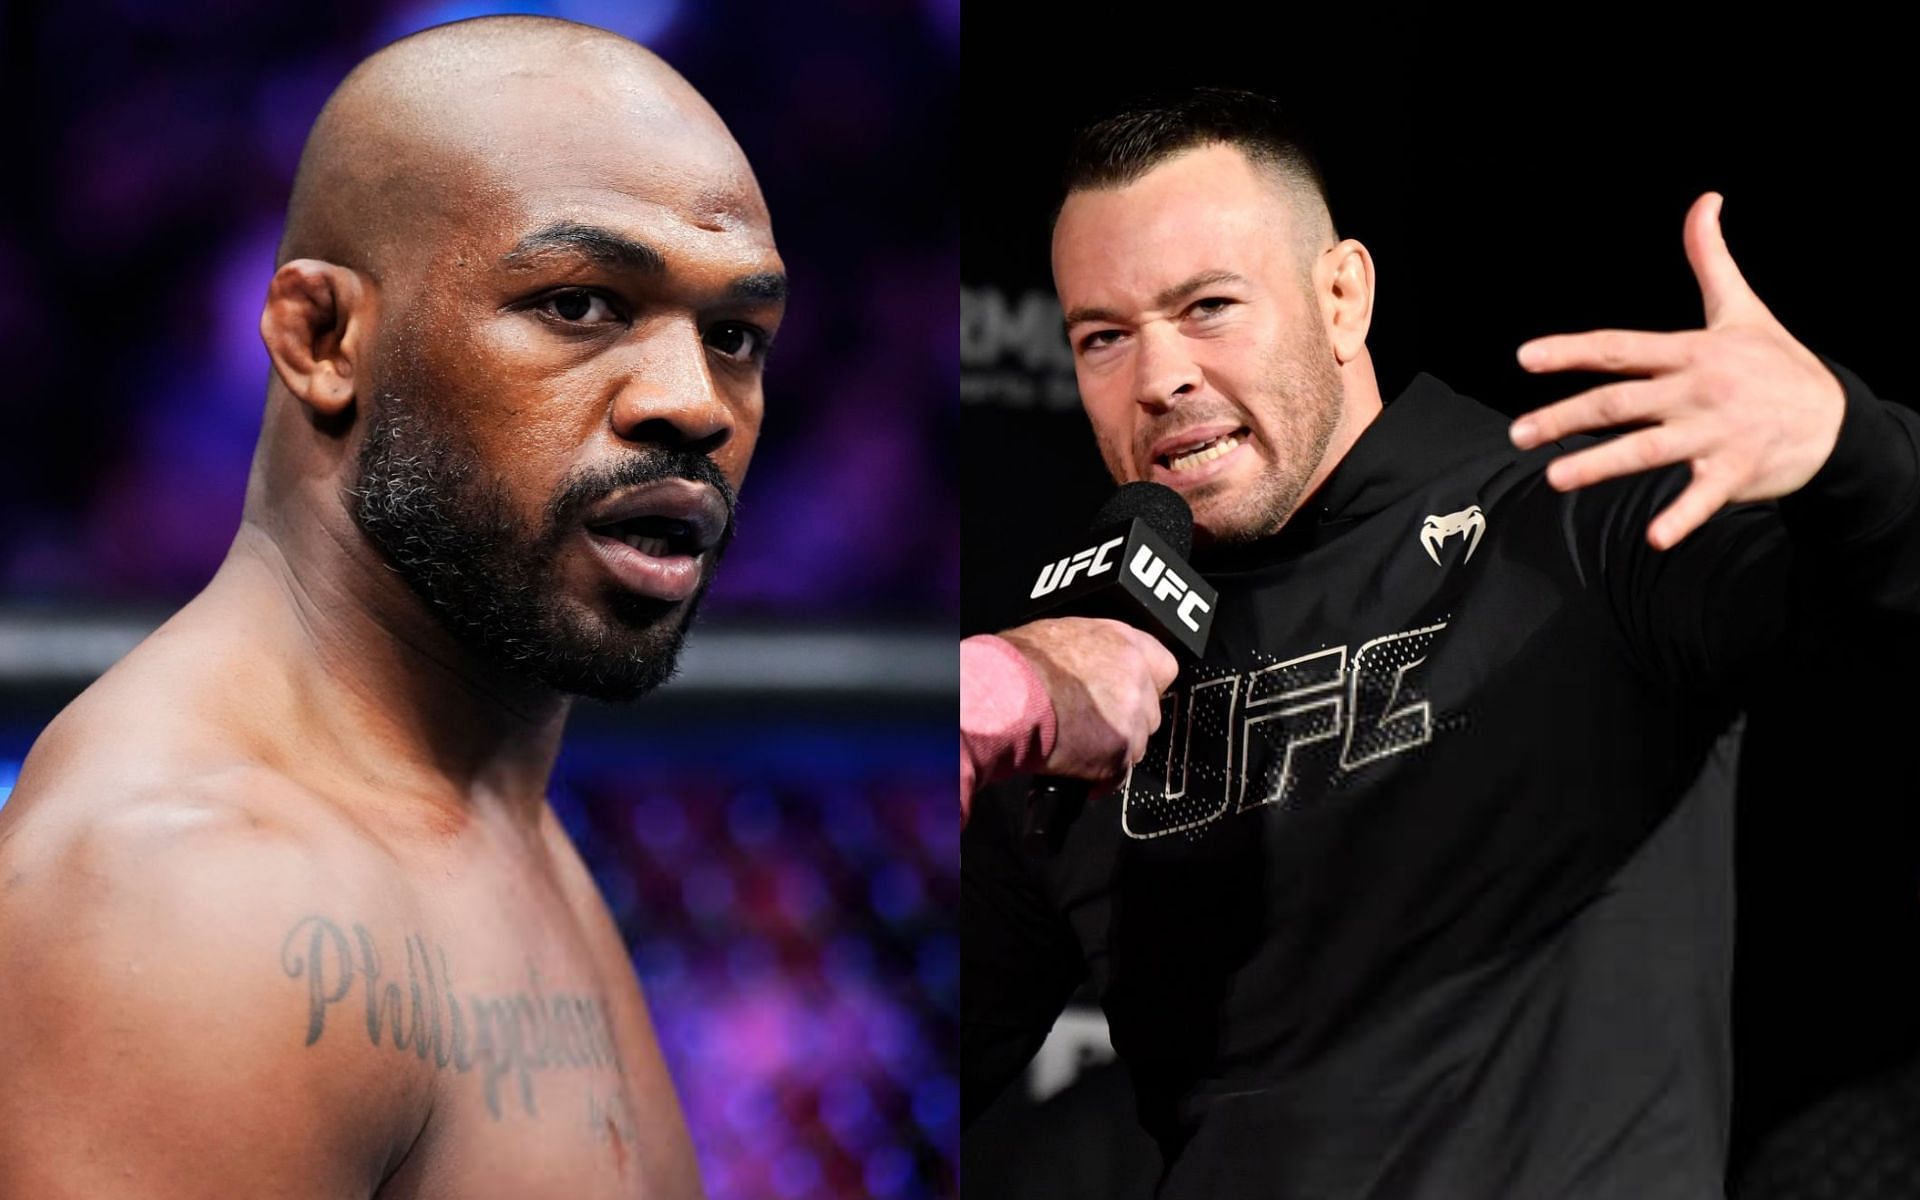 Jon Jones (left) and Colby Covington (right) [Images Courtesy: @GettyImages]